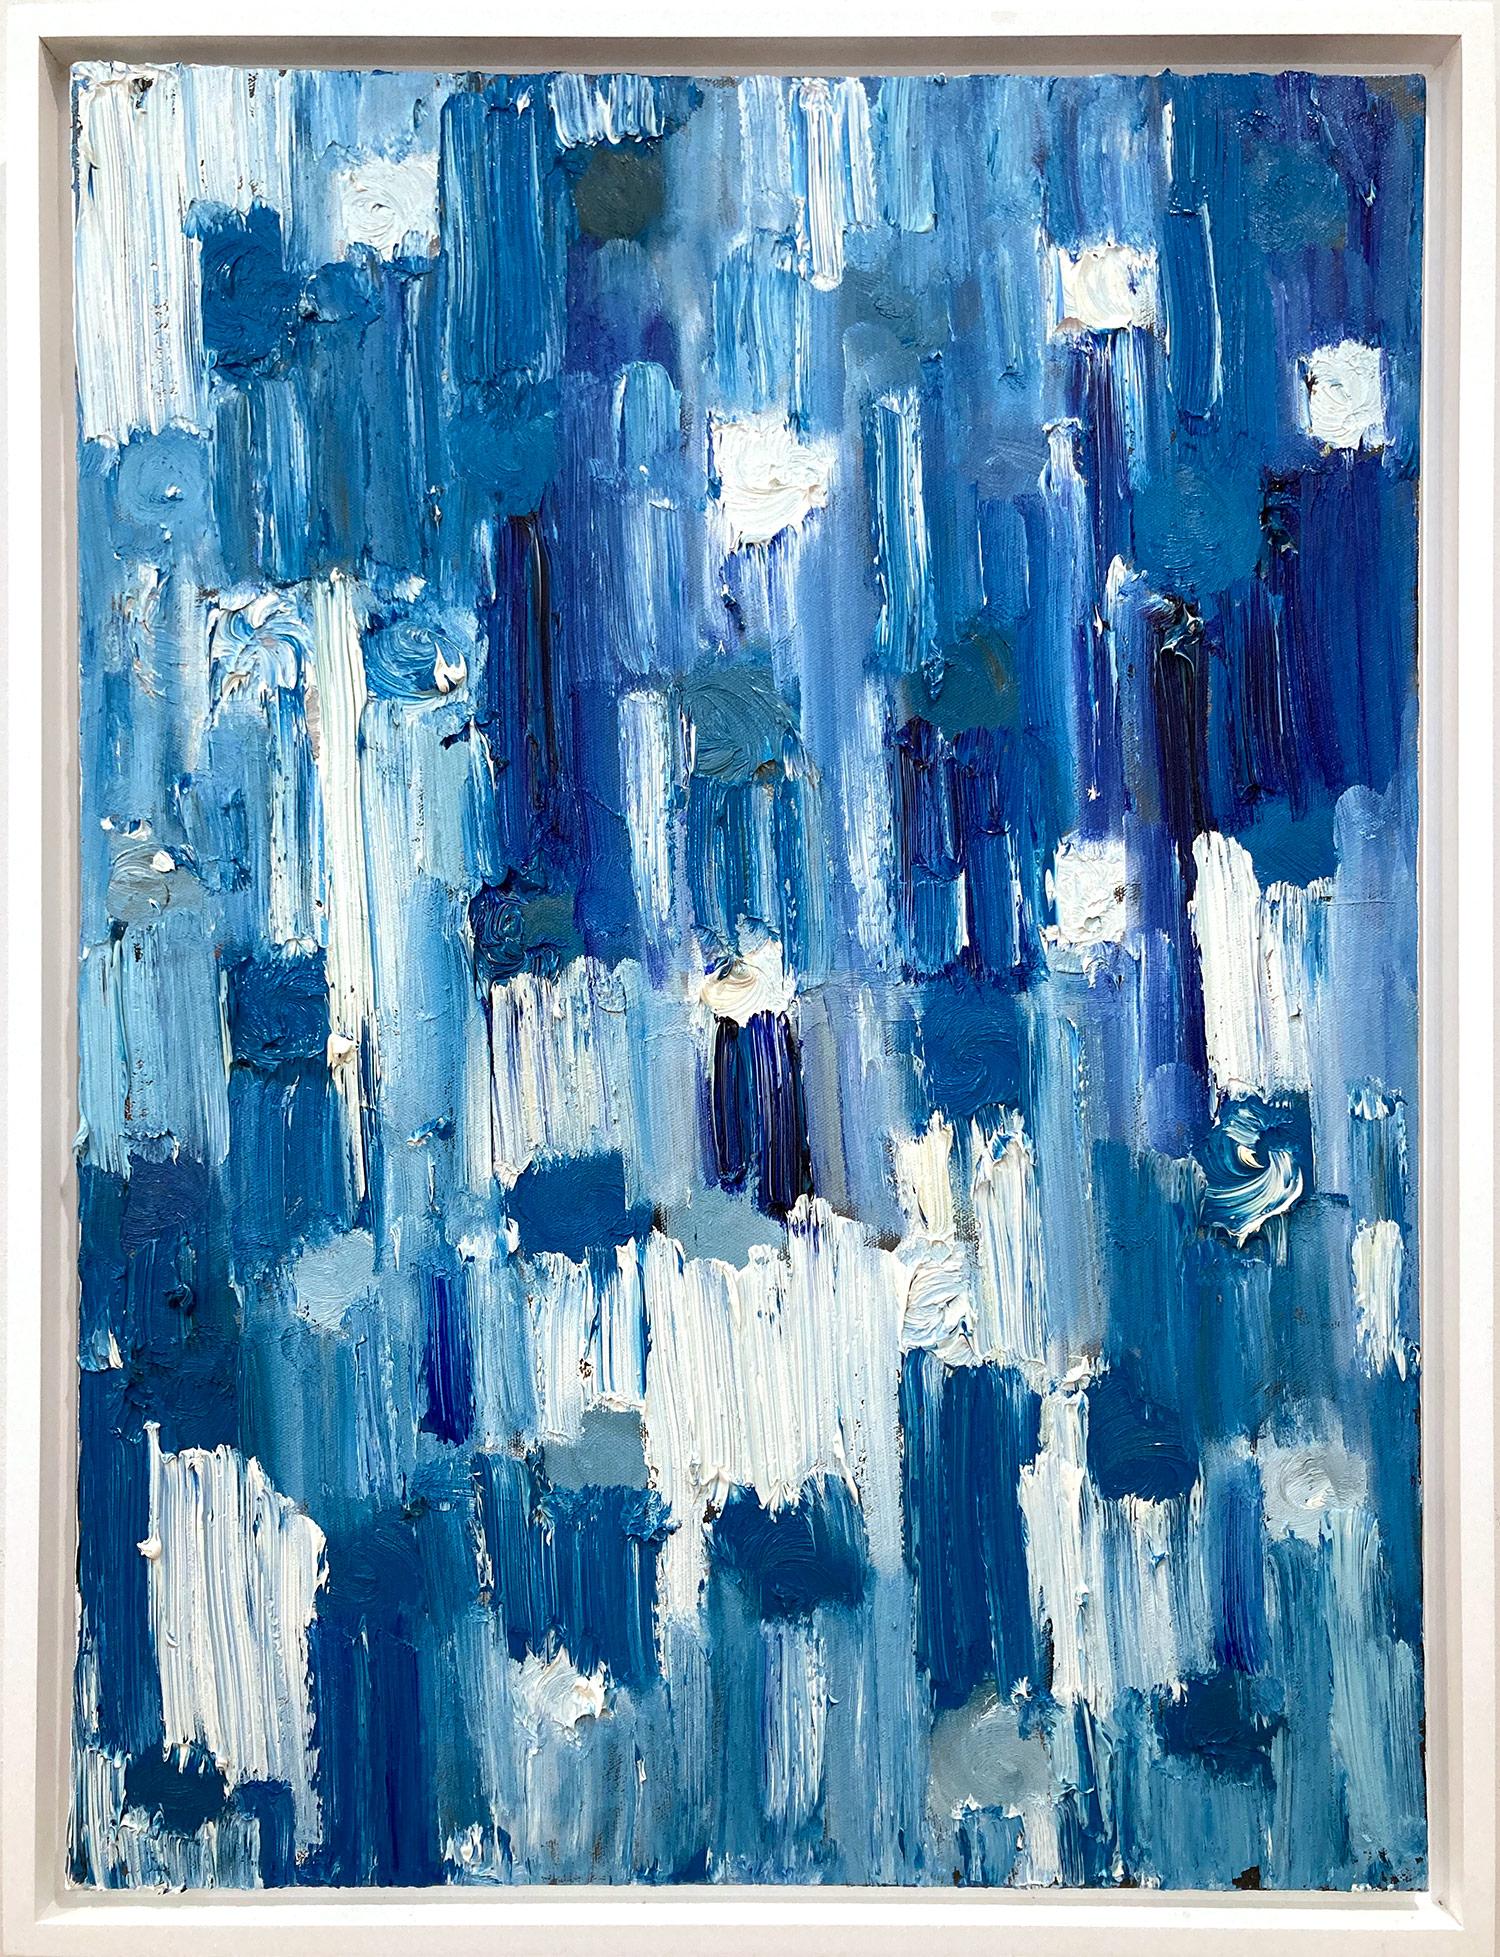 Cindy Shaoul Abstract Painting – „Dripping Dots - Maldives“ Blaues, farbenfrohes, abstraktes Ölgemälde auf Leinwand